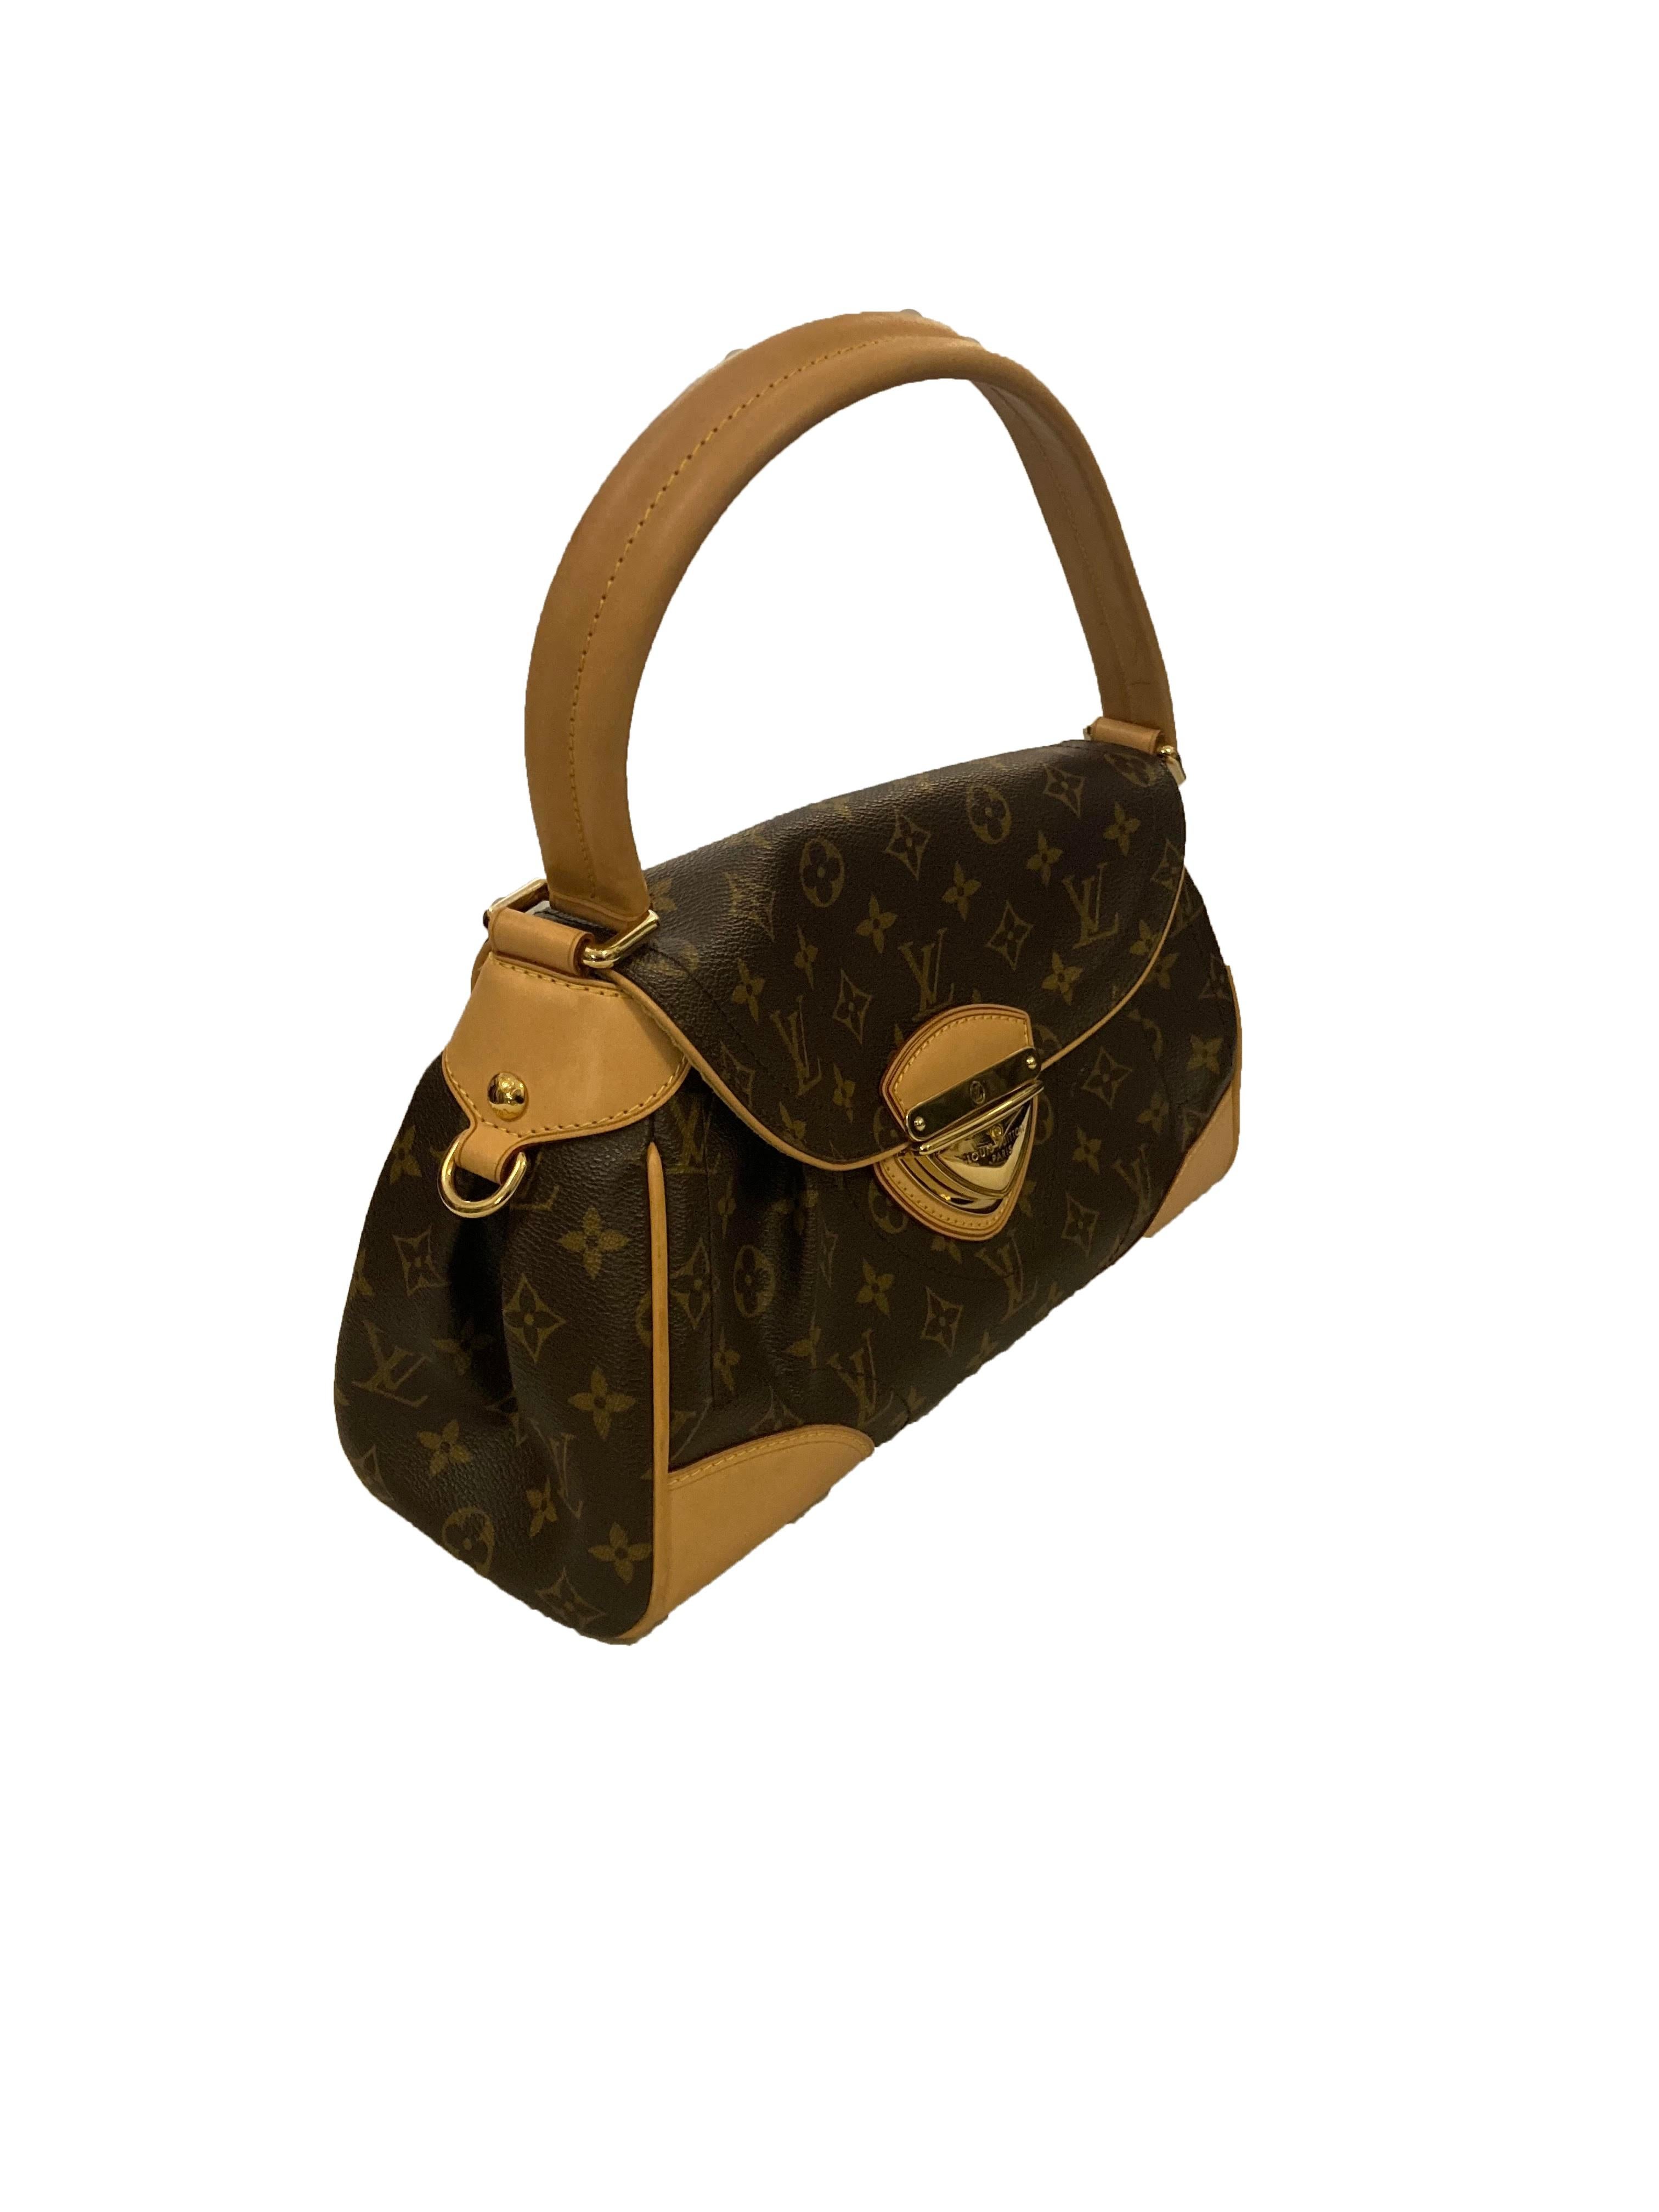 Dark brown and tan Beverly MM shoulder bag from Louis Vuitton. In signature LV monogram coated canvas with cow hide leather trim and single shoulder strap. Featuring gold toned hardware and a triangular push lock closure front and centre branded